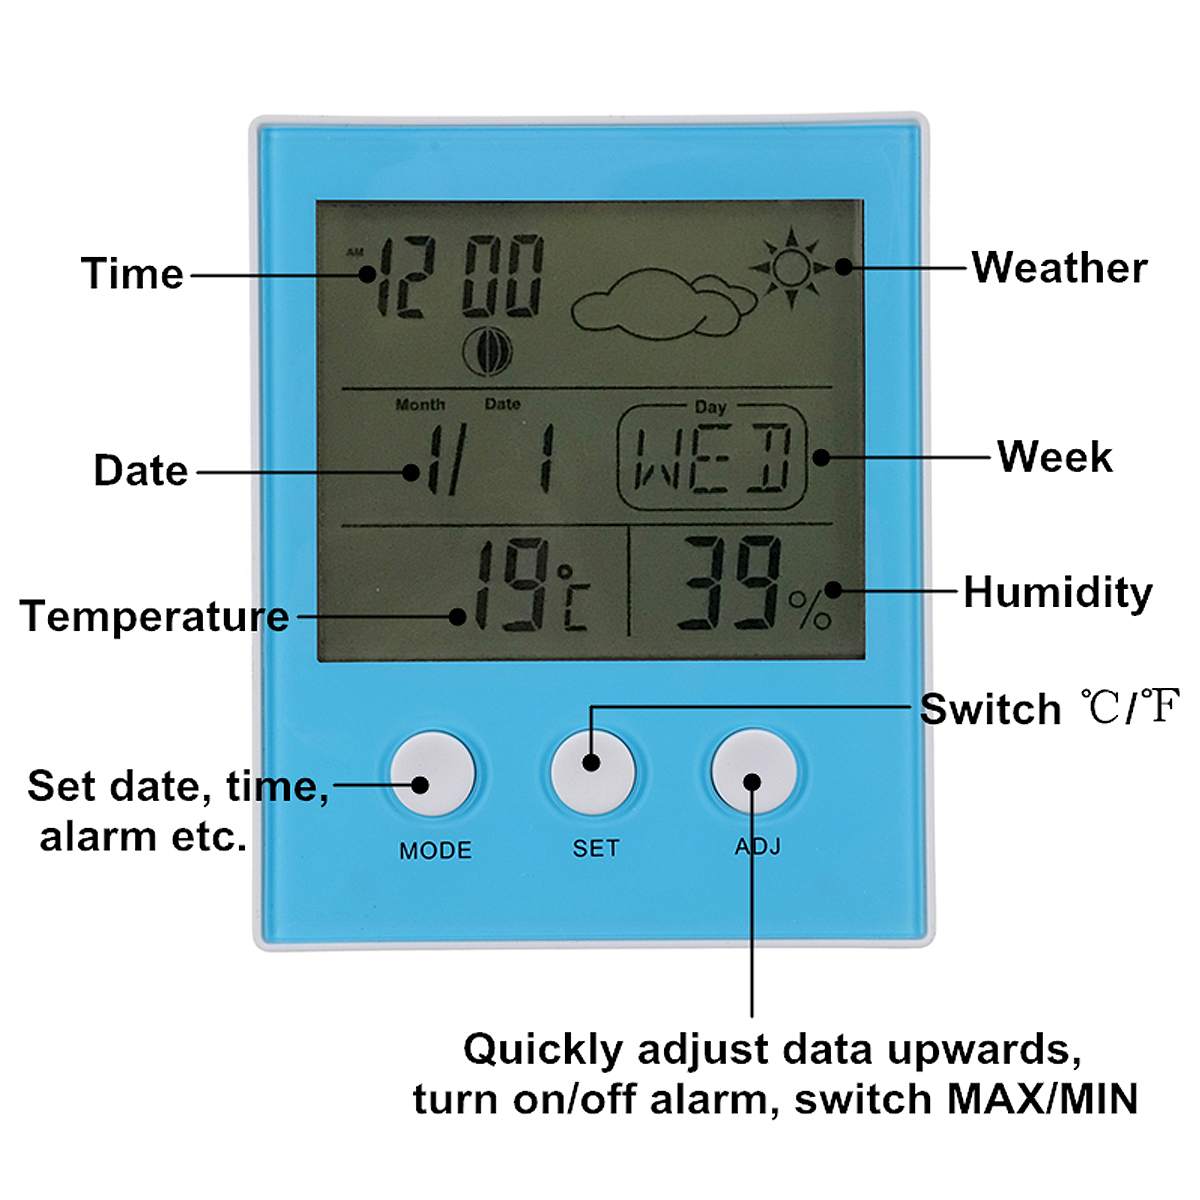 CH-904-Digital-Thermometer-Hygrometer-Temperature-Humidity-Tester-LED-Backlight-Time-Date-Calendar-A-1245366-6